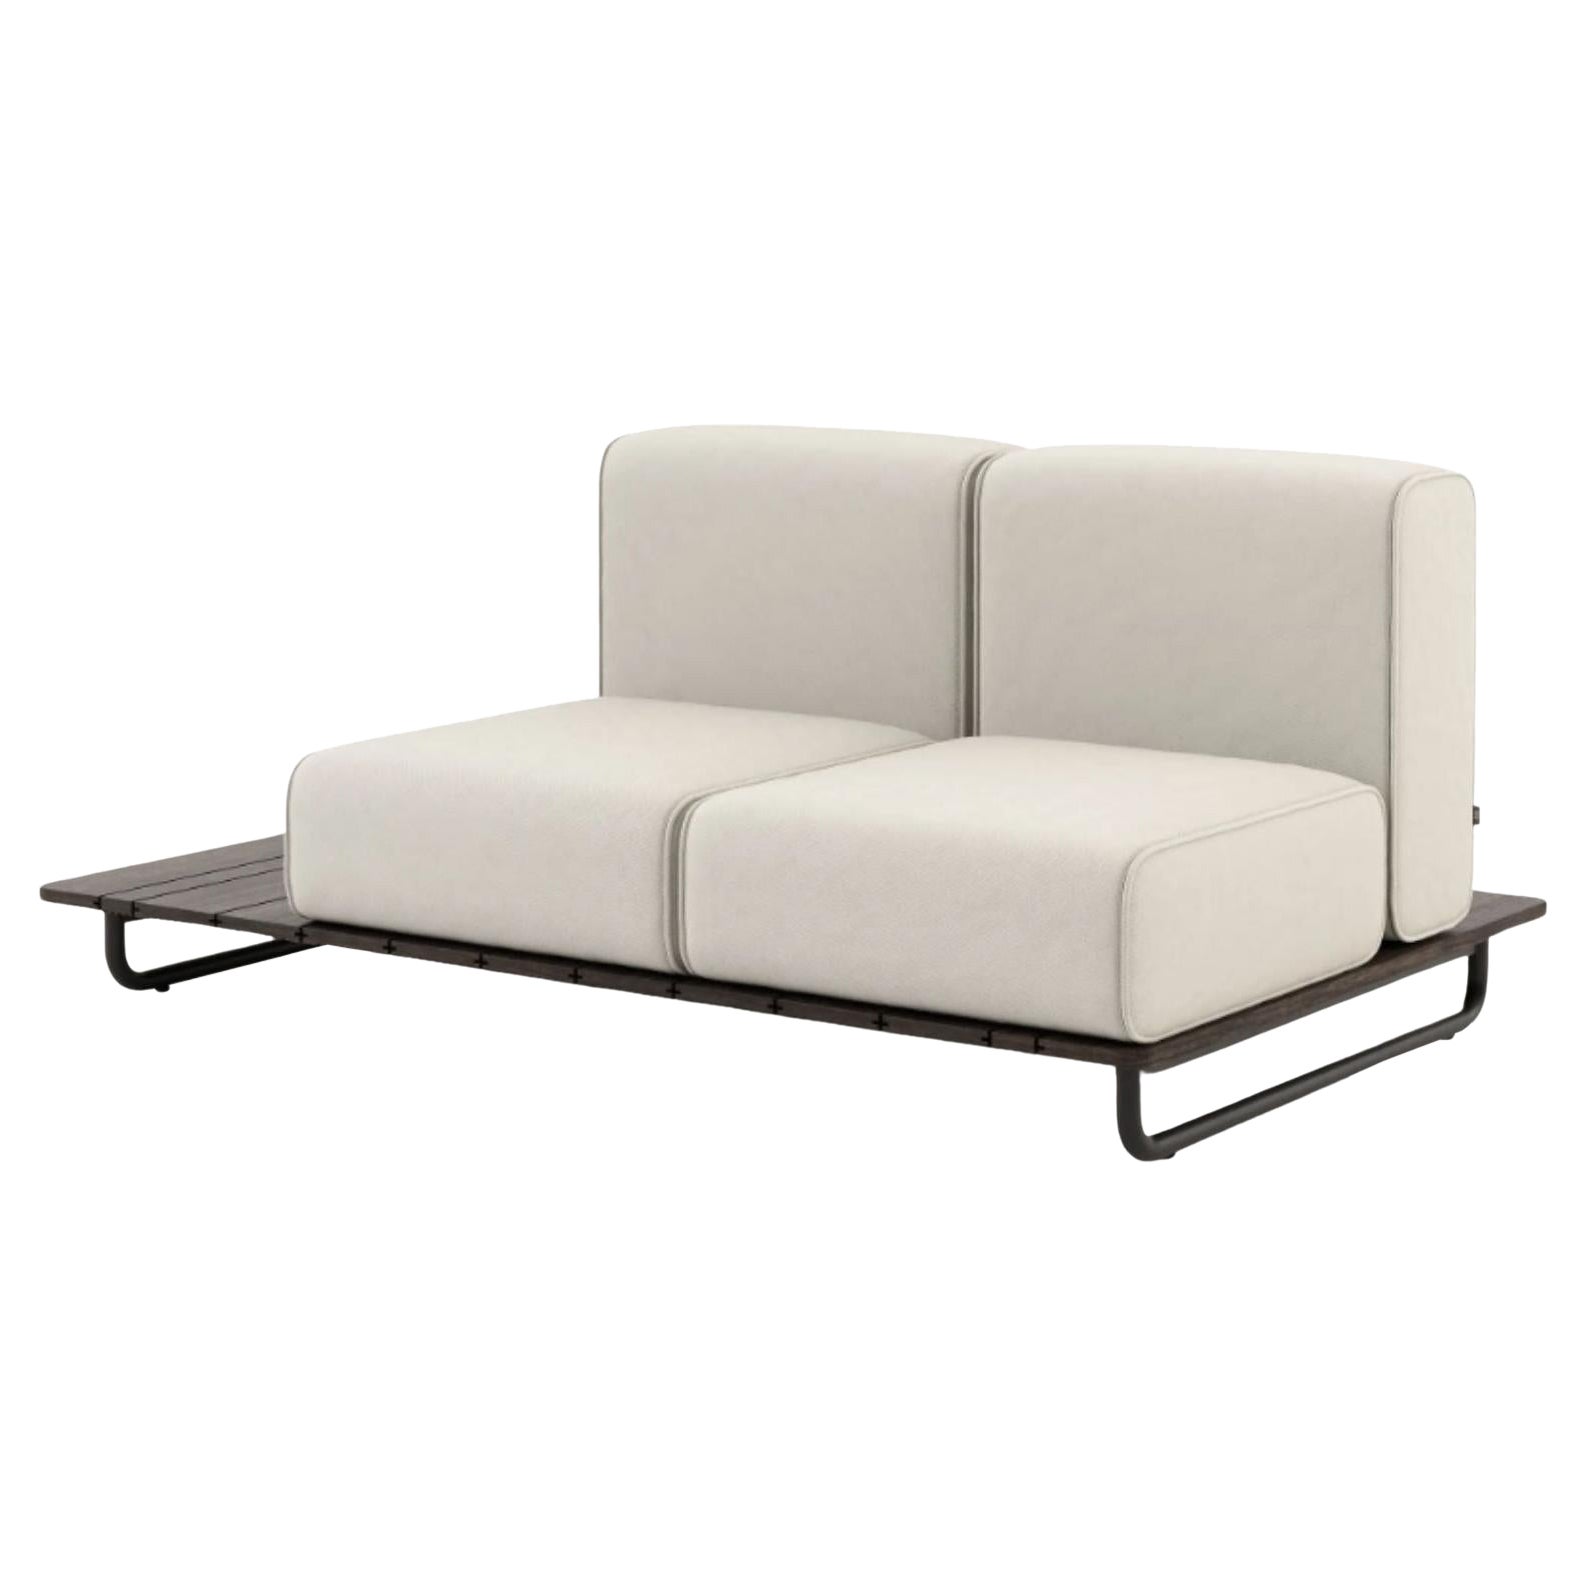 Copacabana Sofa Without Armrest by Domkapa For Sale